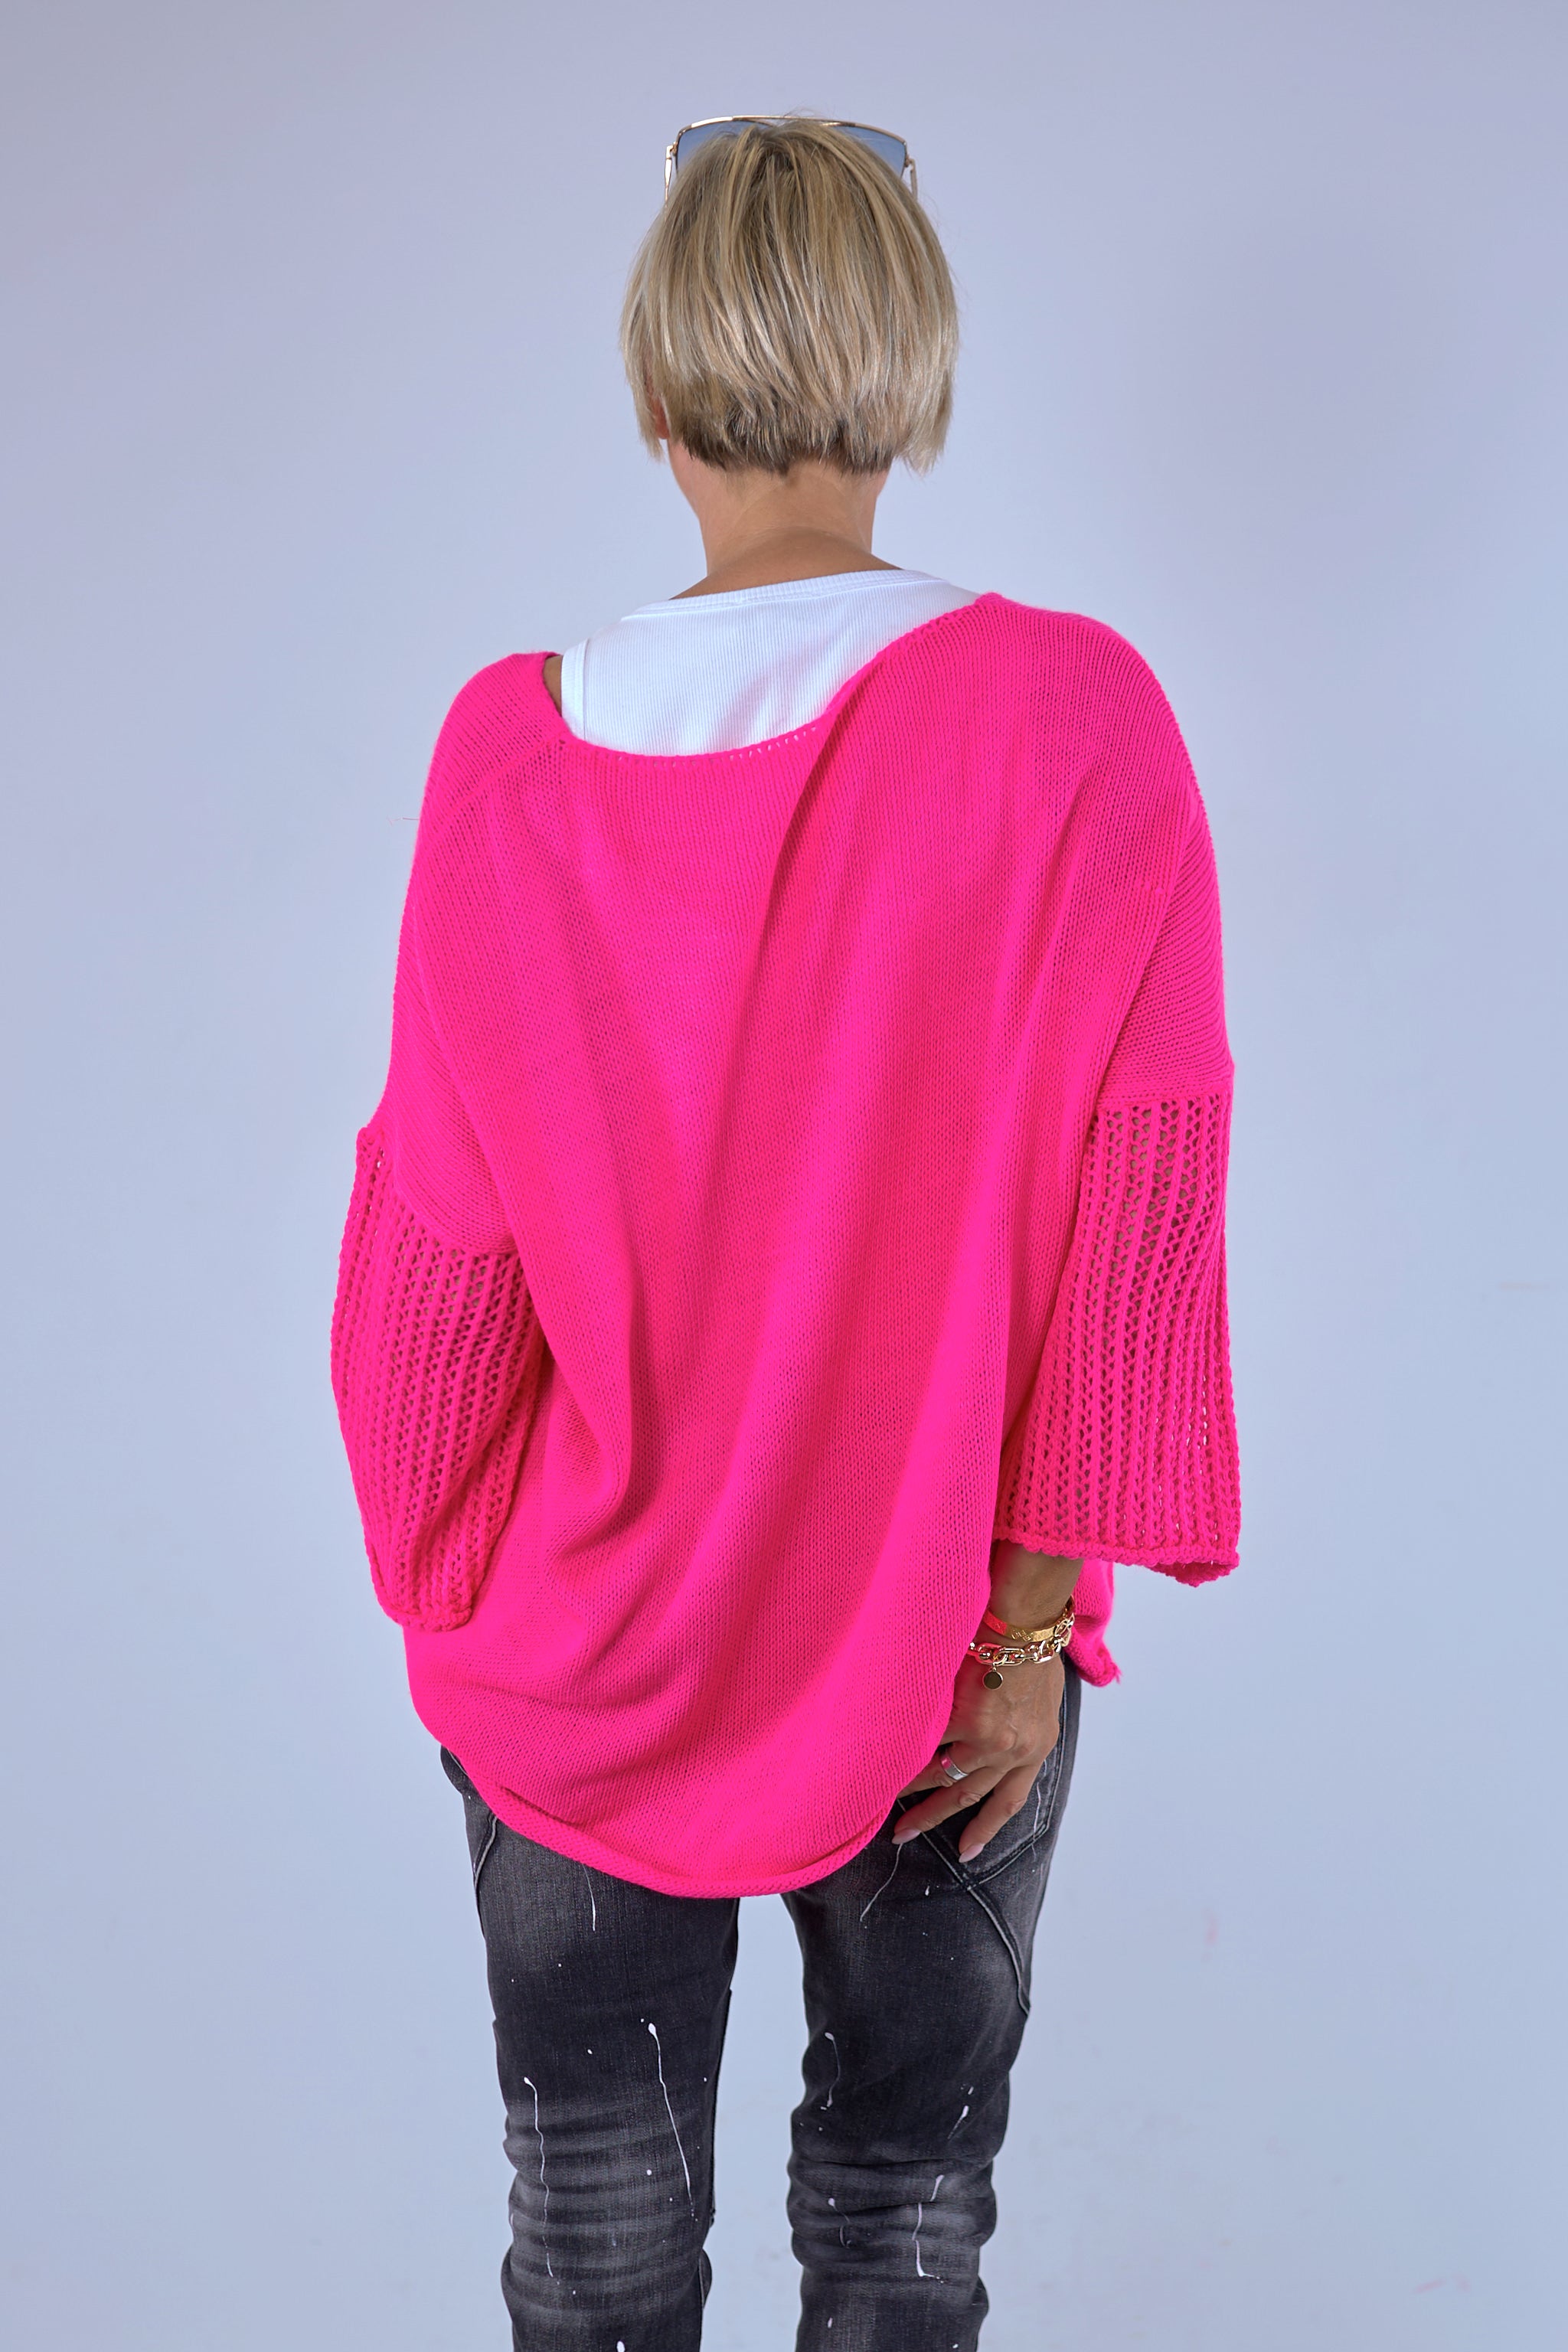 Knitted sweater "Skull", pink